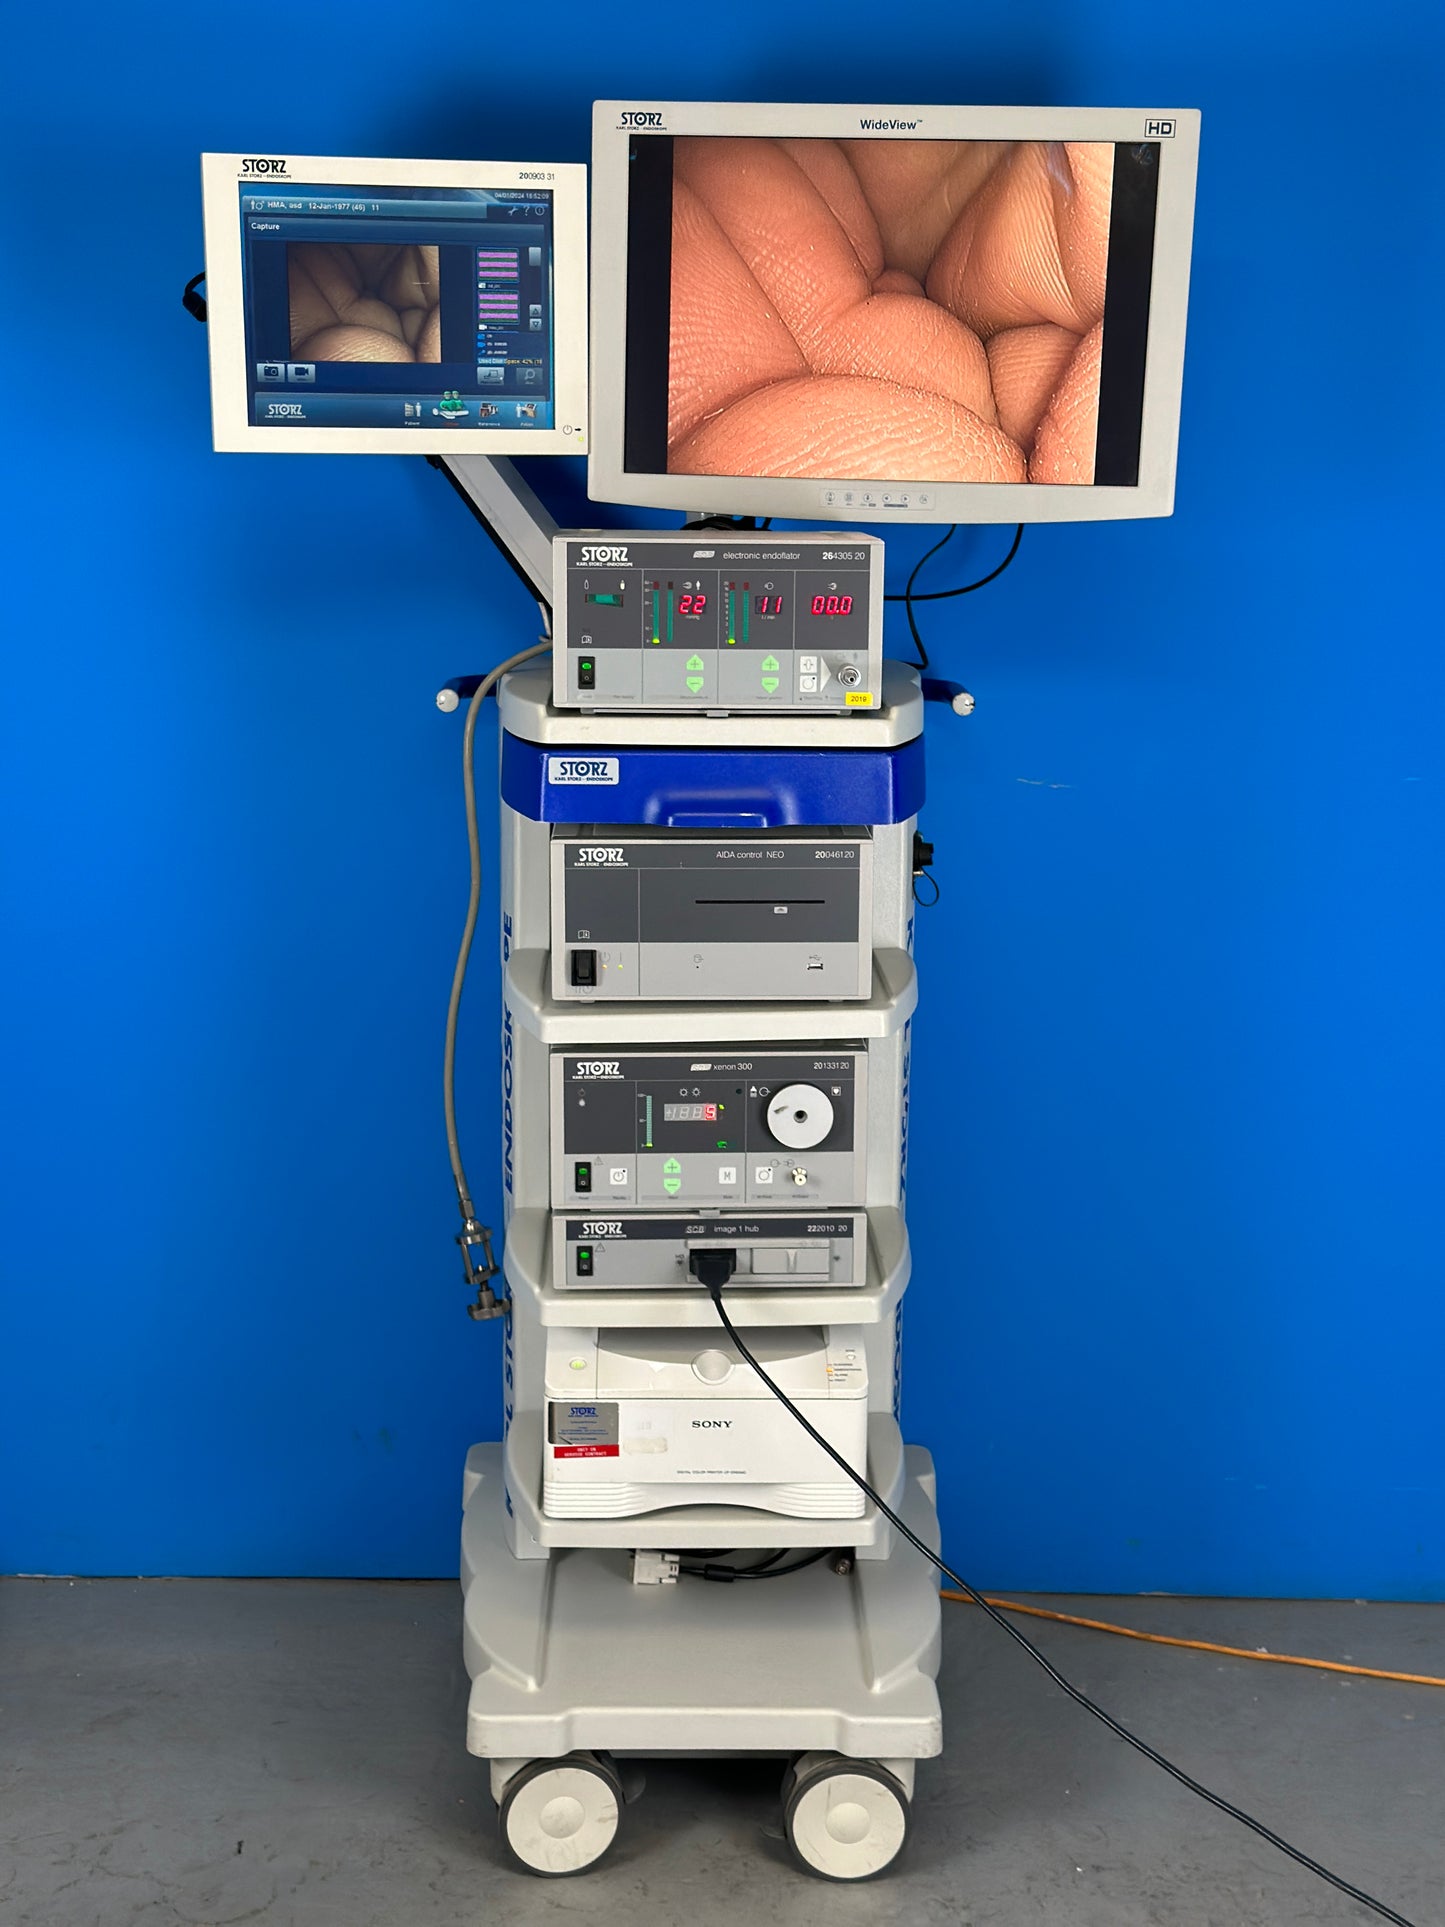  KarlStorz Image 1 is a color video camera system which can be used as an endoscopic accessory with rigid or flexible endoscopes .